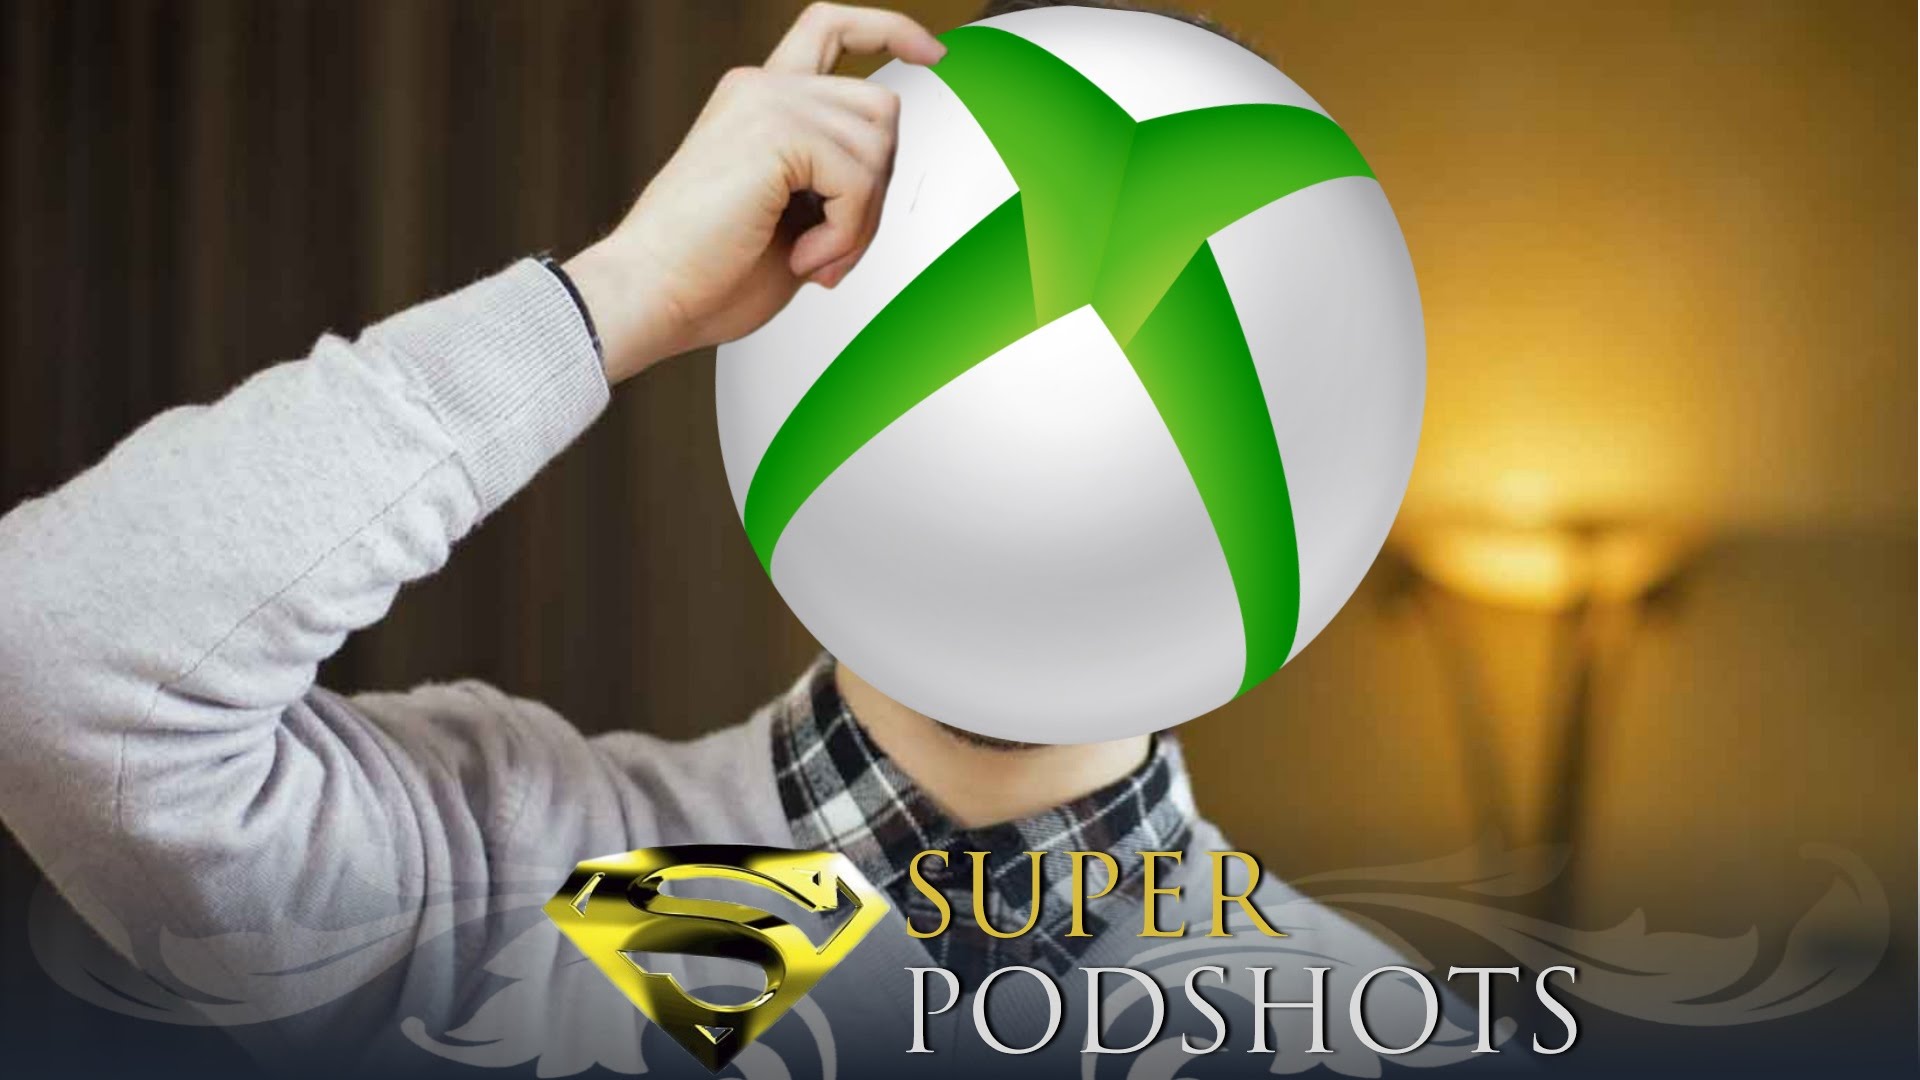 Super Podshots Ep. 52 - MS Continues To Confuse Gamers, The Worst Generation & More 